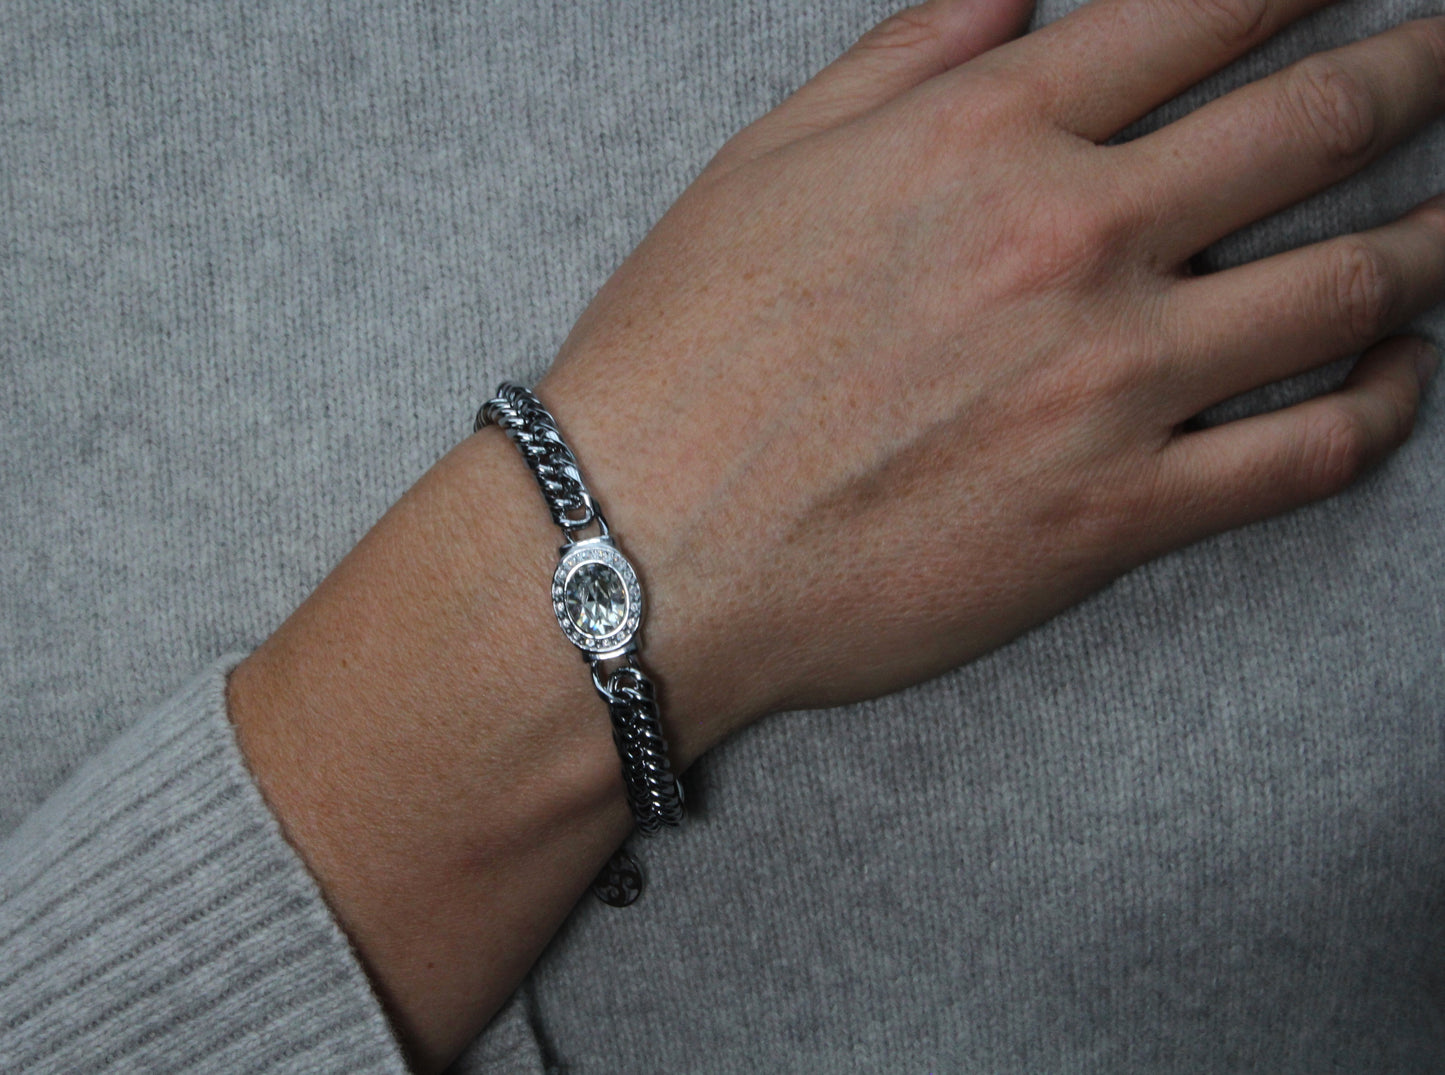 Extravaganza silver bracelet with white crystals